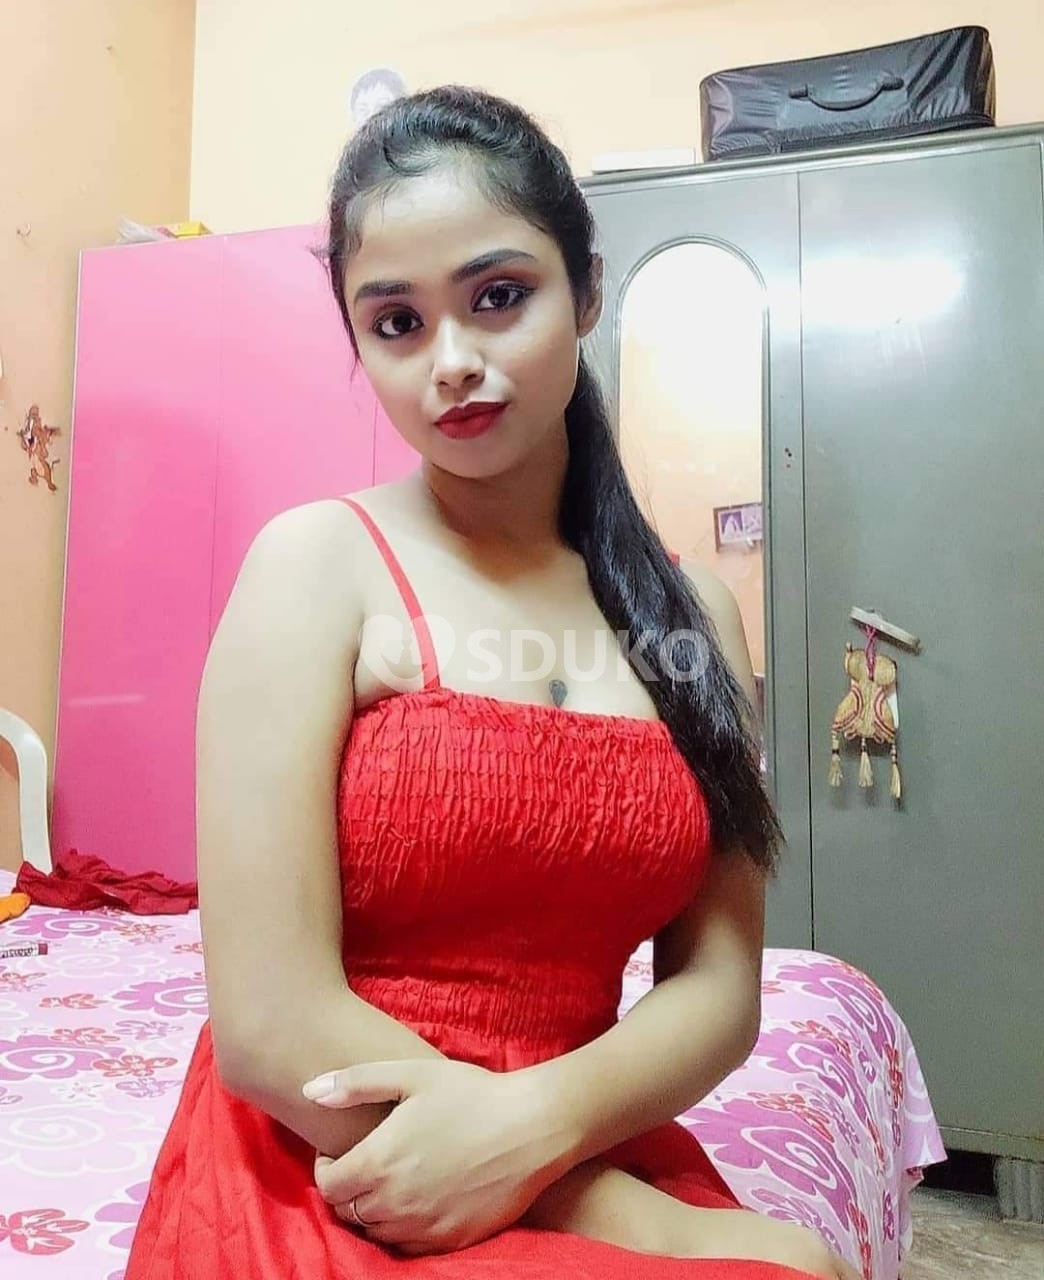 ✅Bathinda 24 hours service available ⭐unlimited sort 100% interested VIP call girls full satisfied all type service 